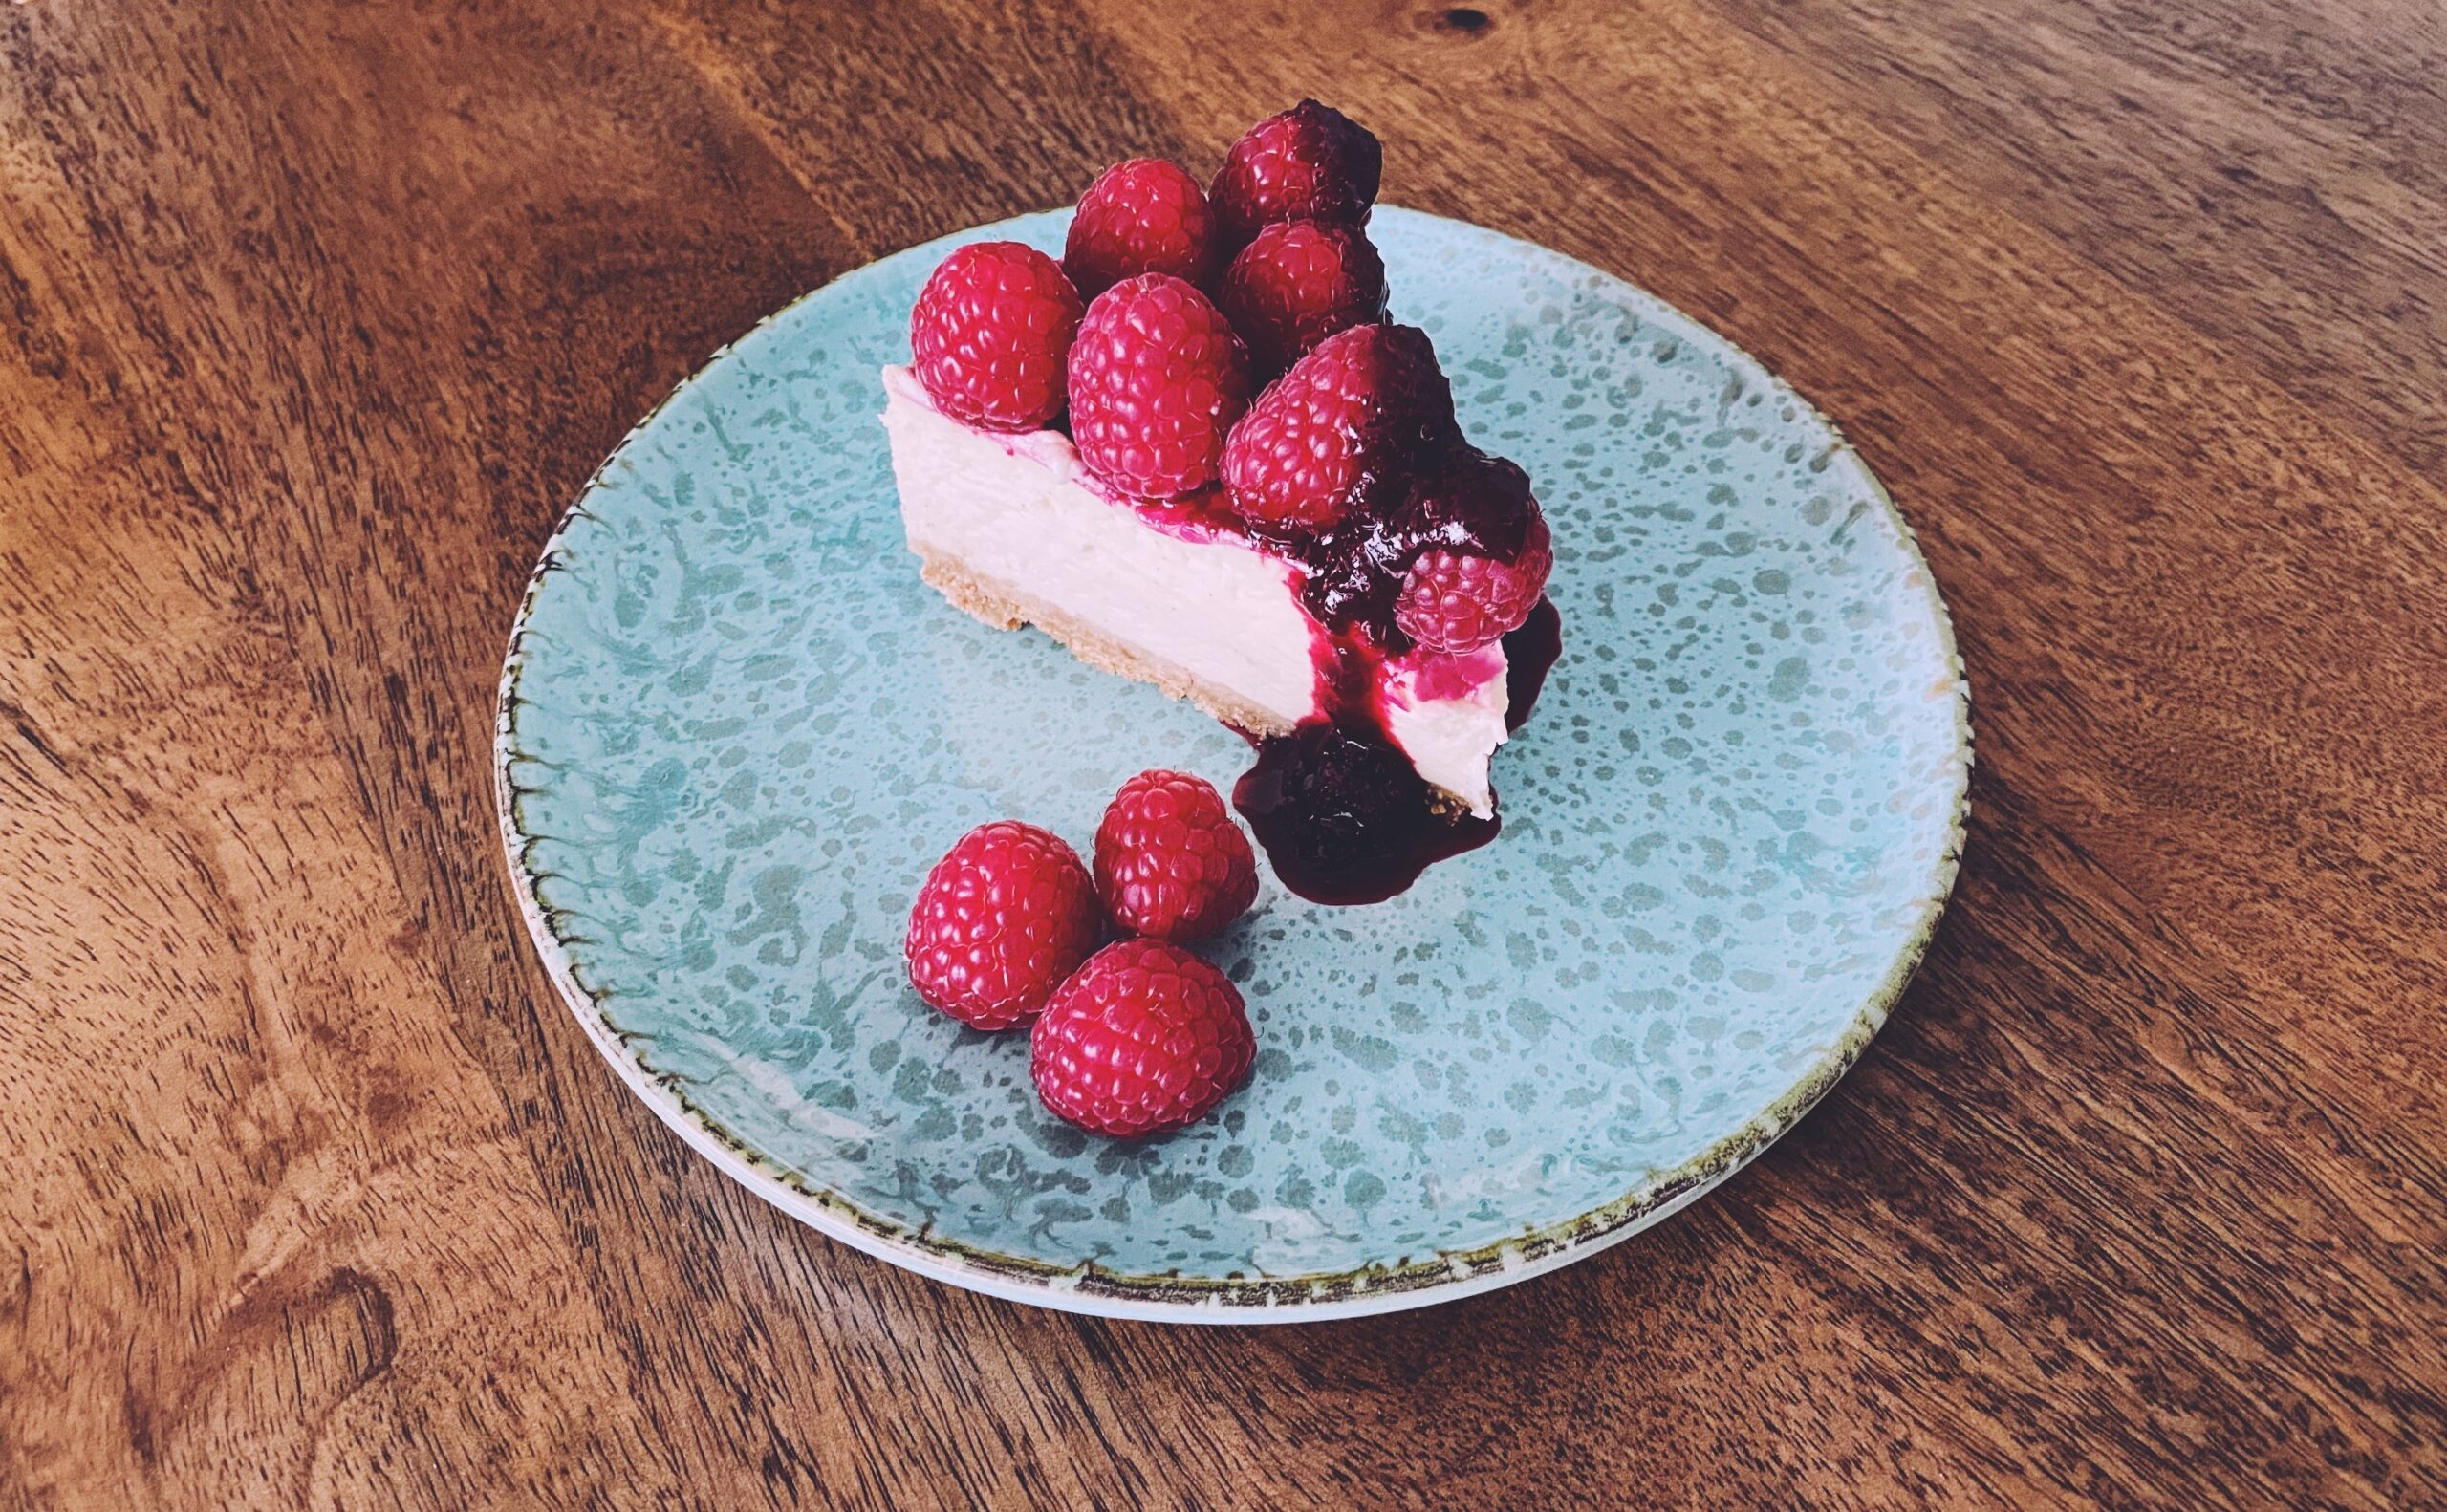 The Best Cheesecake Recipe, Works Perfectly With Lactose-Free Ingredients